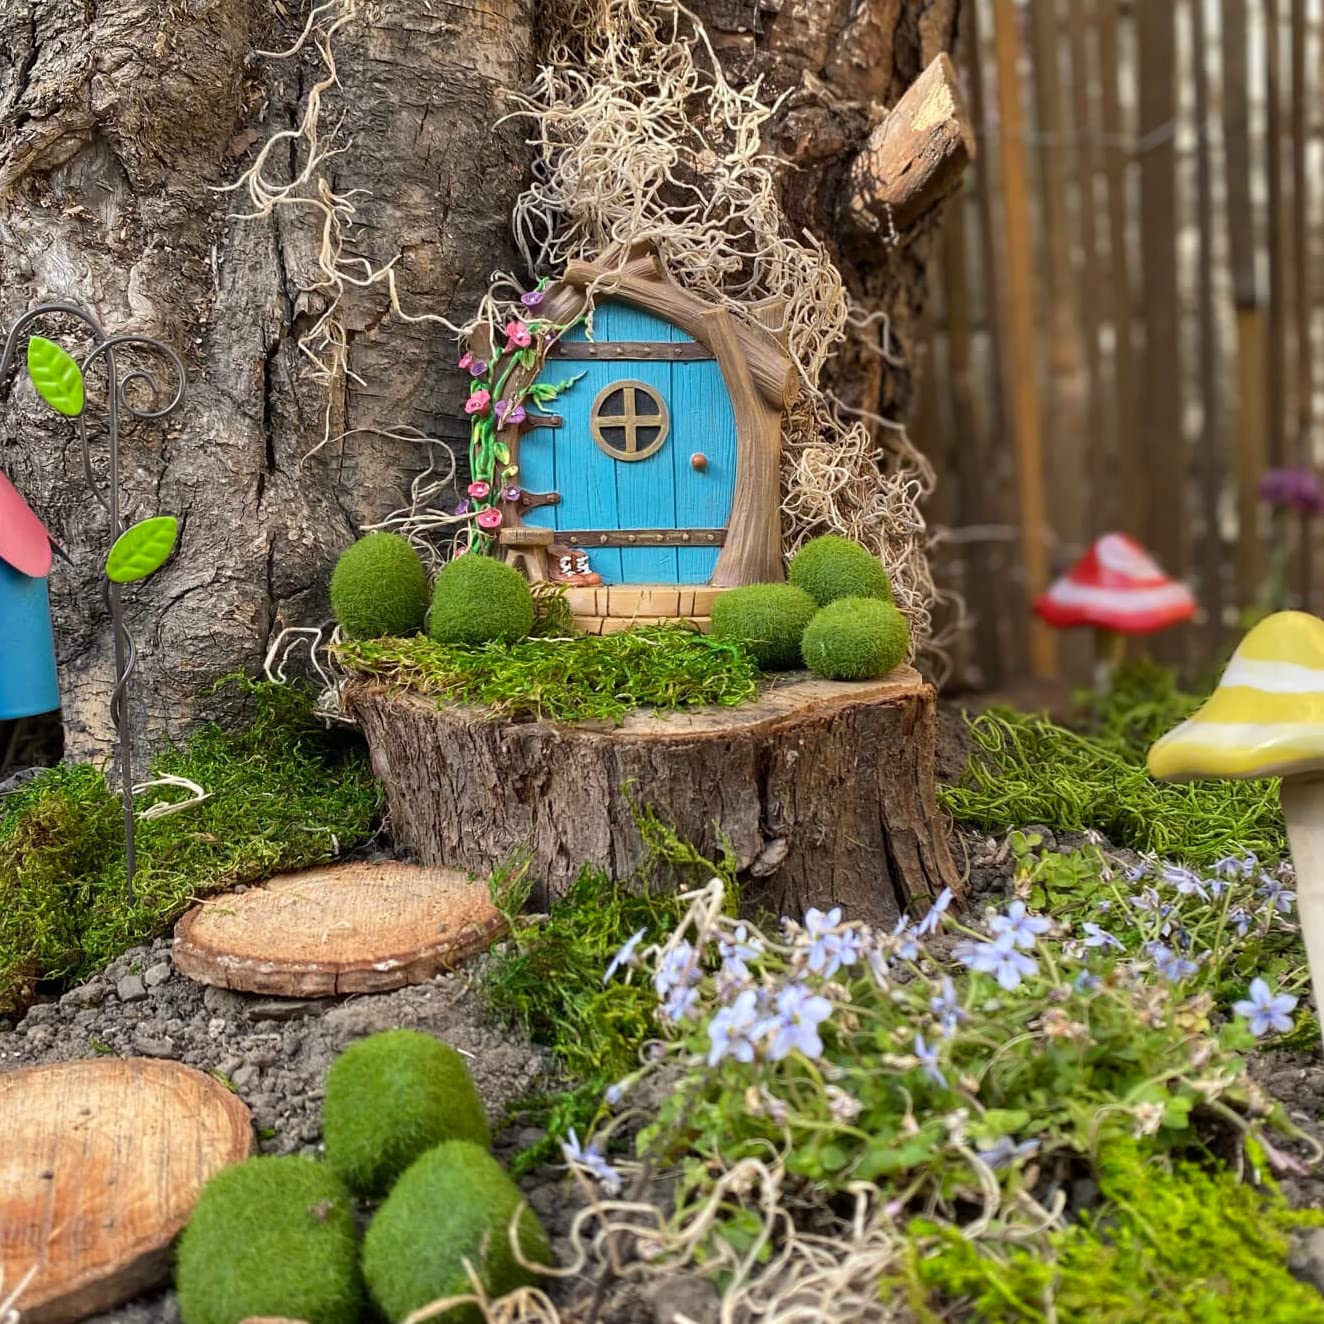 Get The Cutest Mini Door Toadstool Garden Ornaments For Flower Fairies & Gnomes